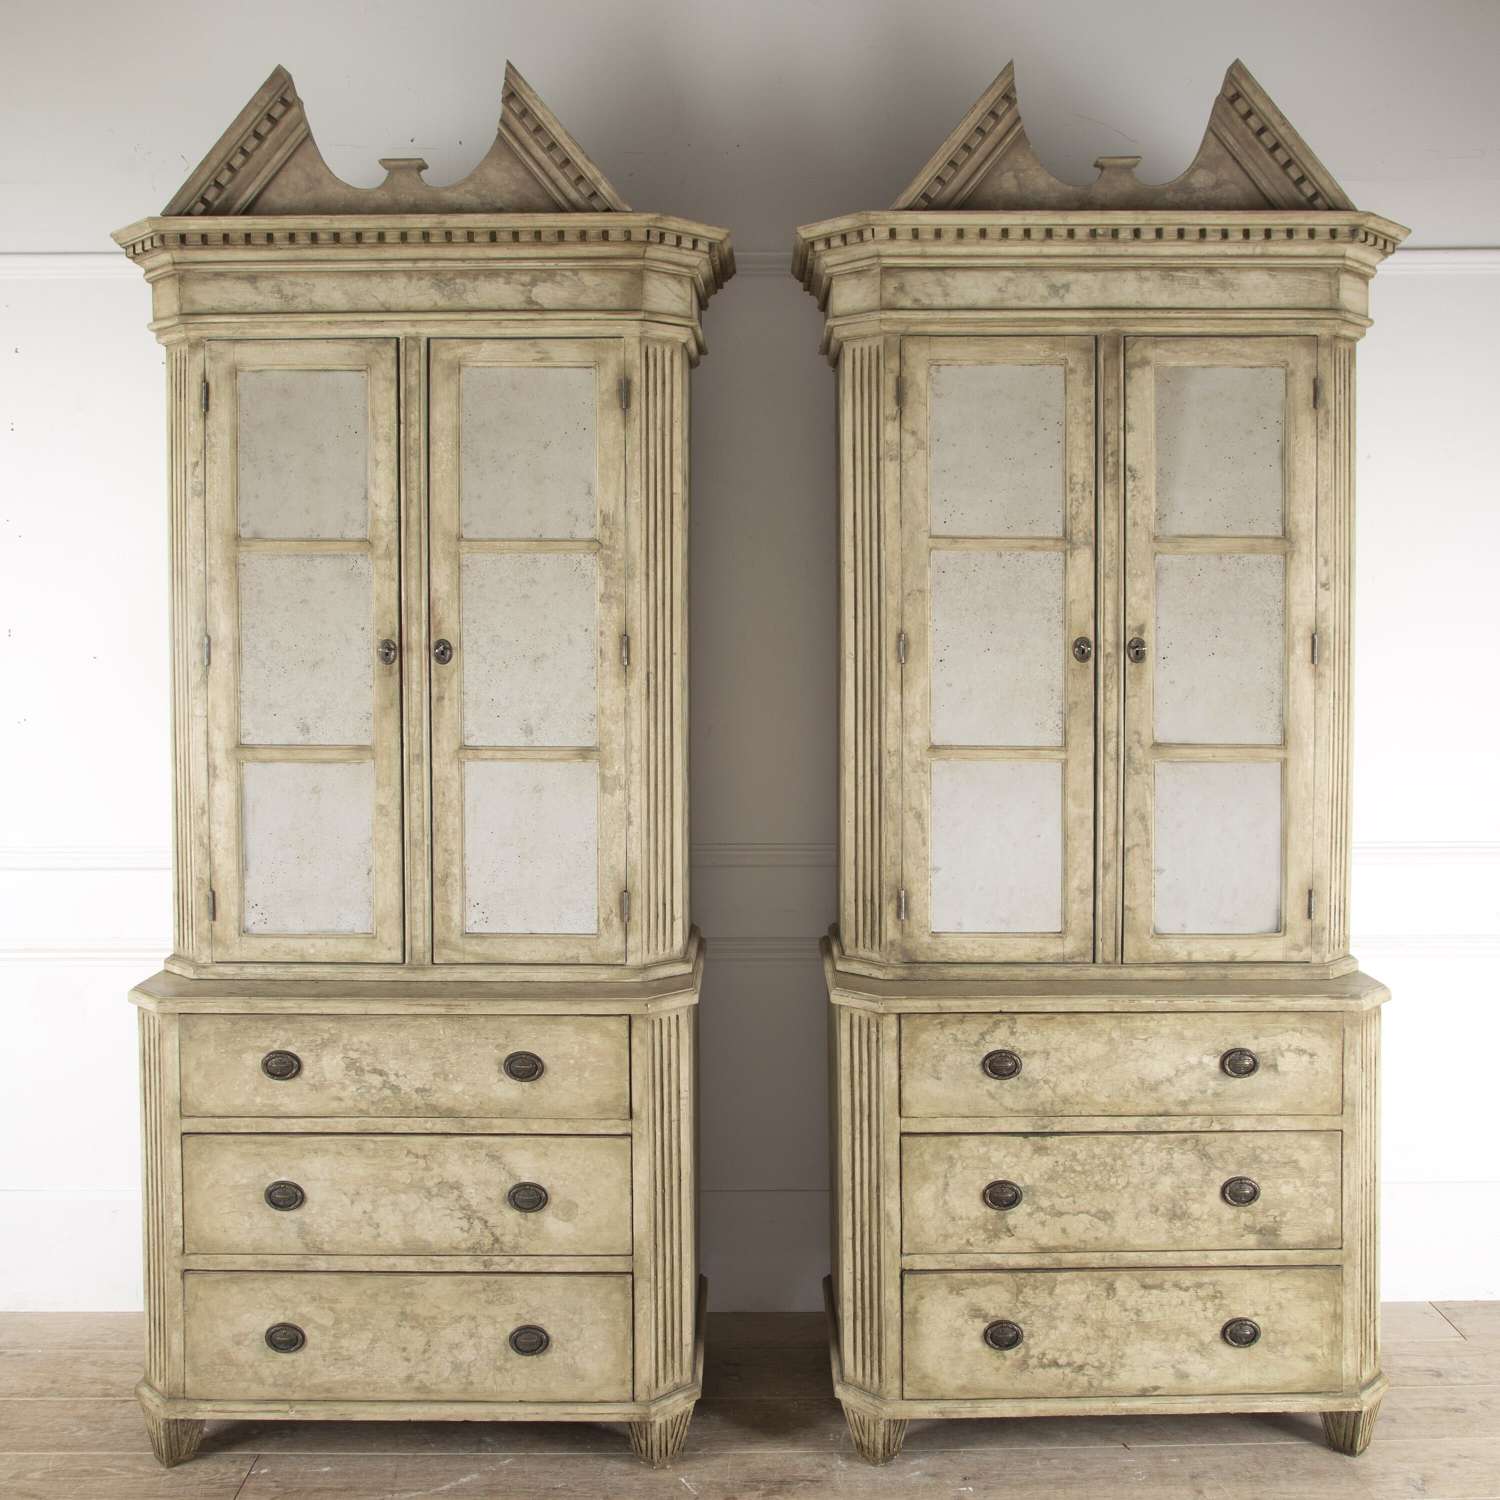 A Pair of Swedish painted library cabinets